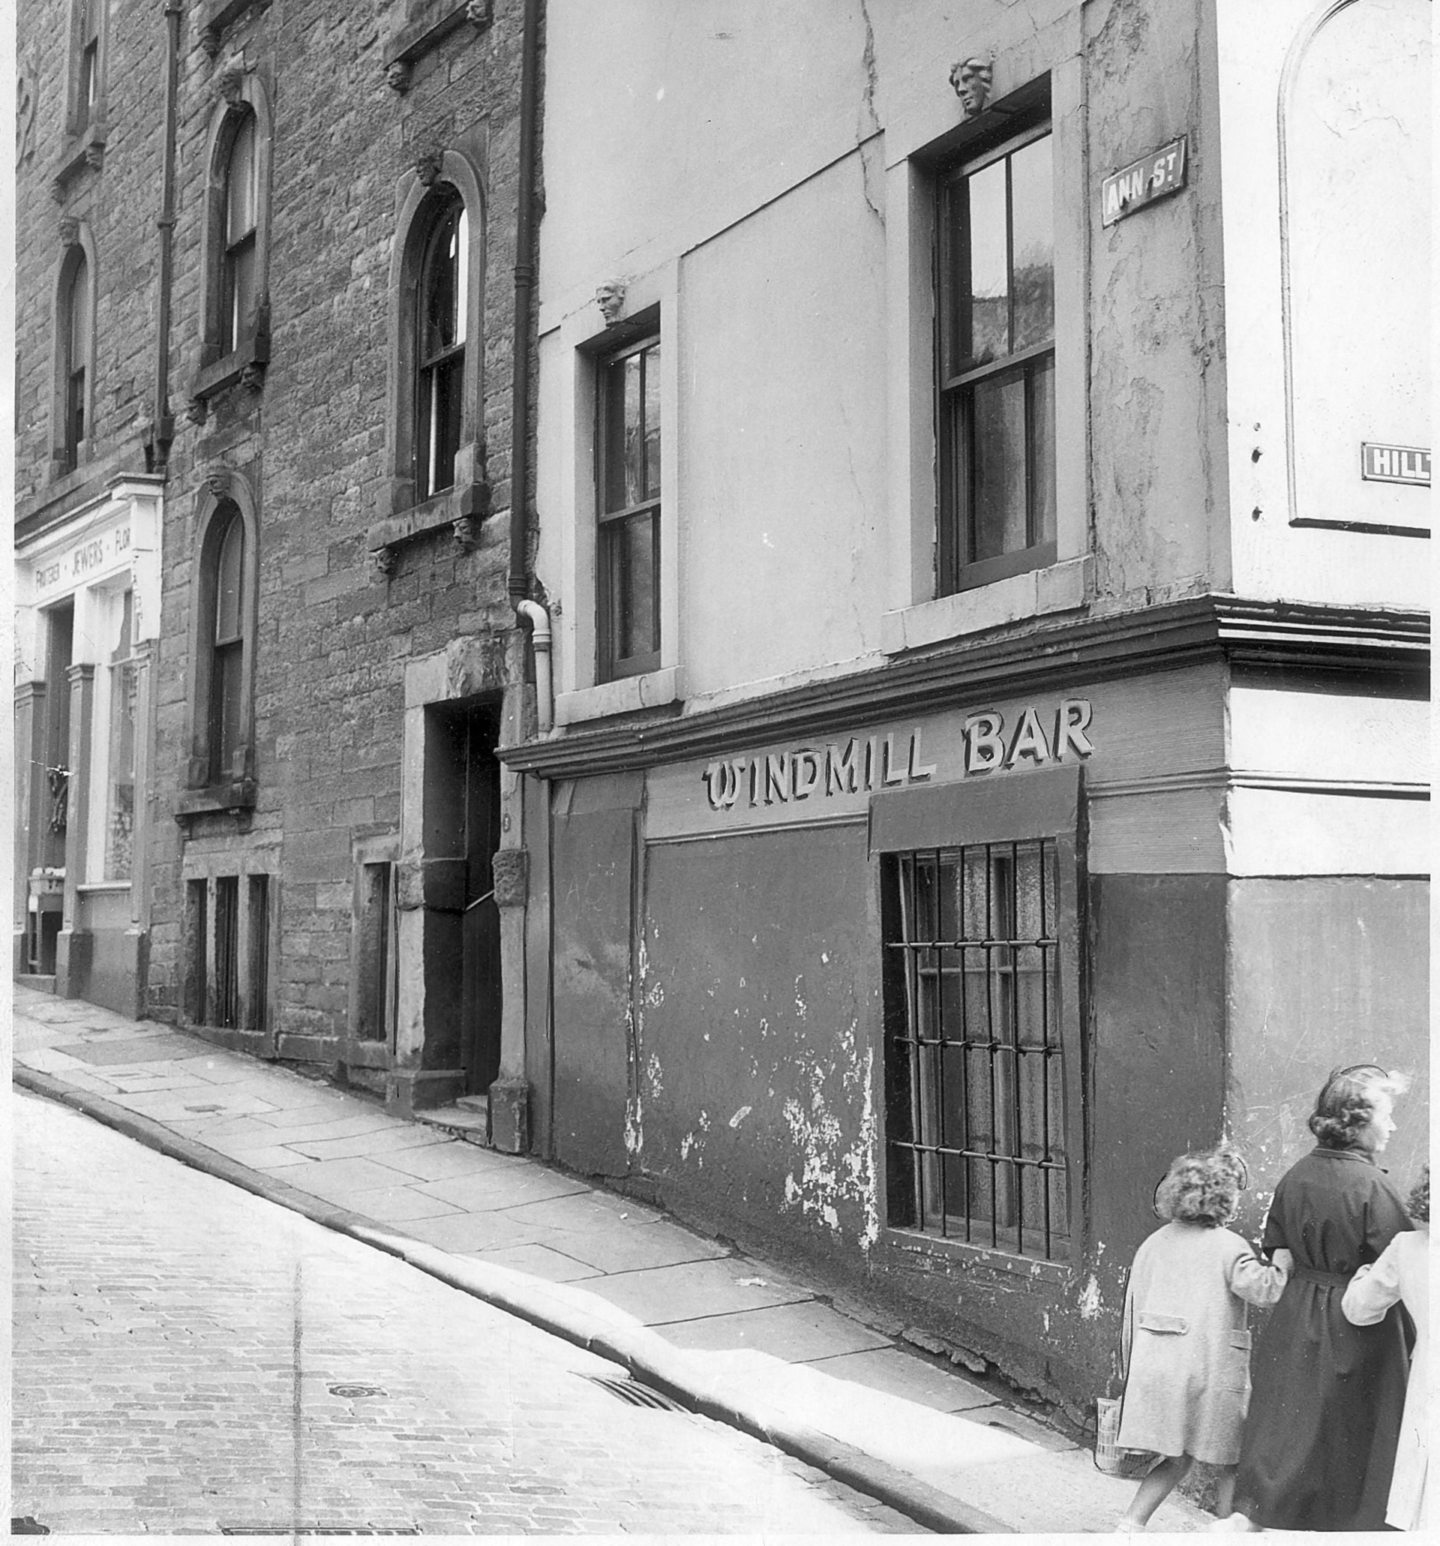 The carved masks can be seen on the side of the Windmill Bar in 1960. Image: DC Thomson.